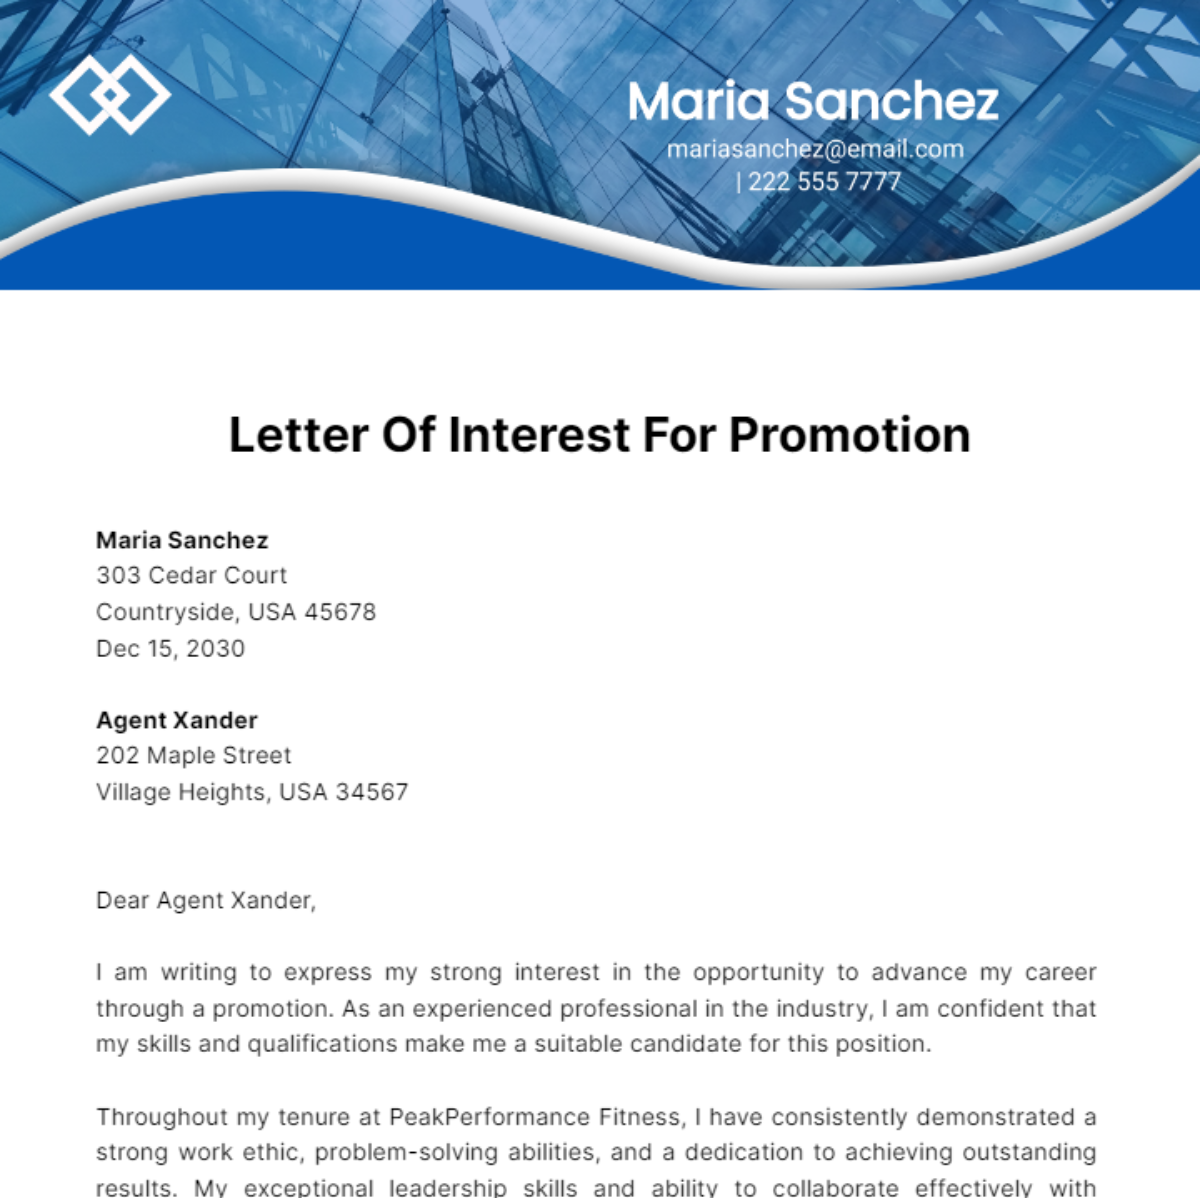 Letter Of Interest For Promotion Template